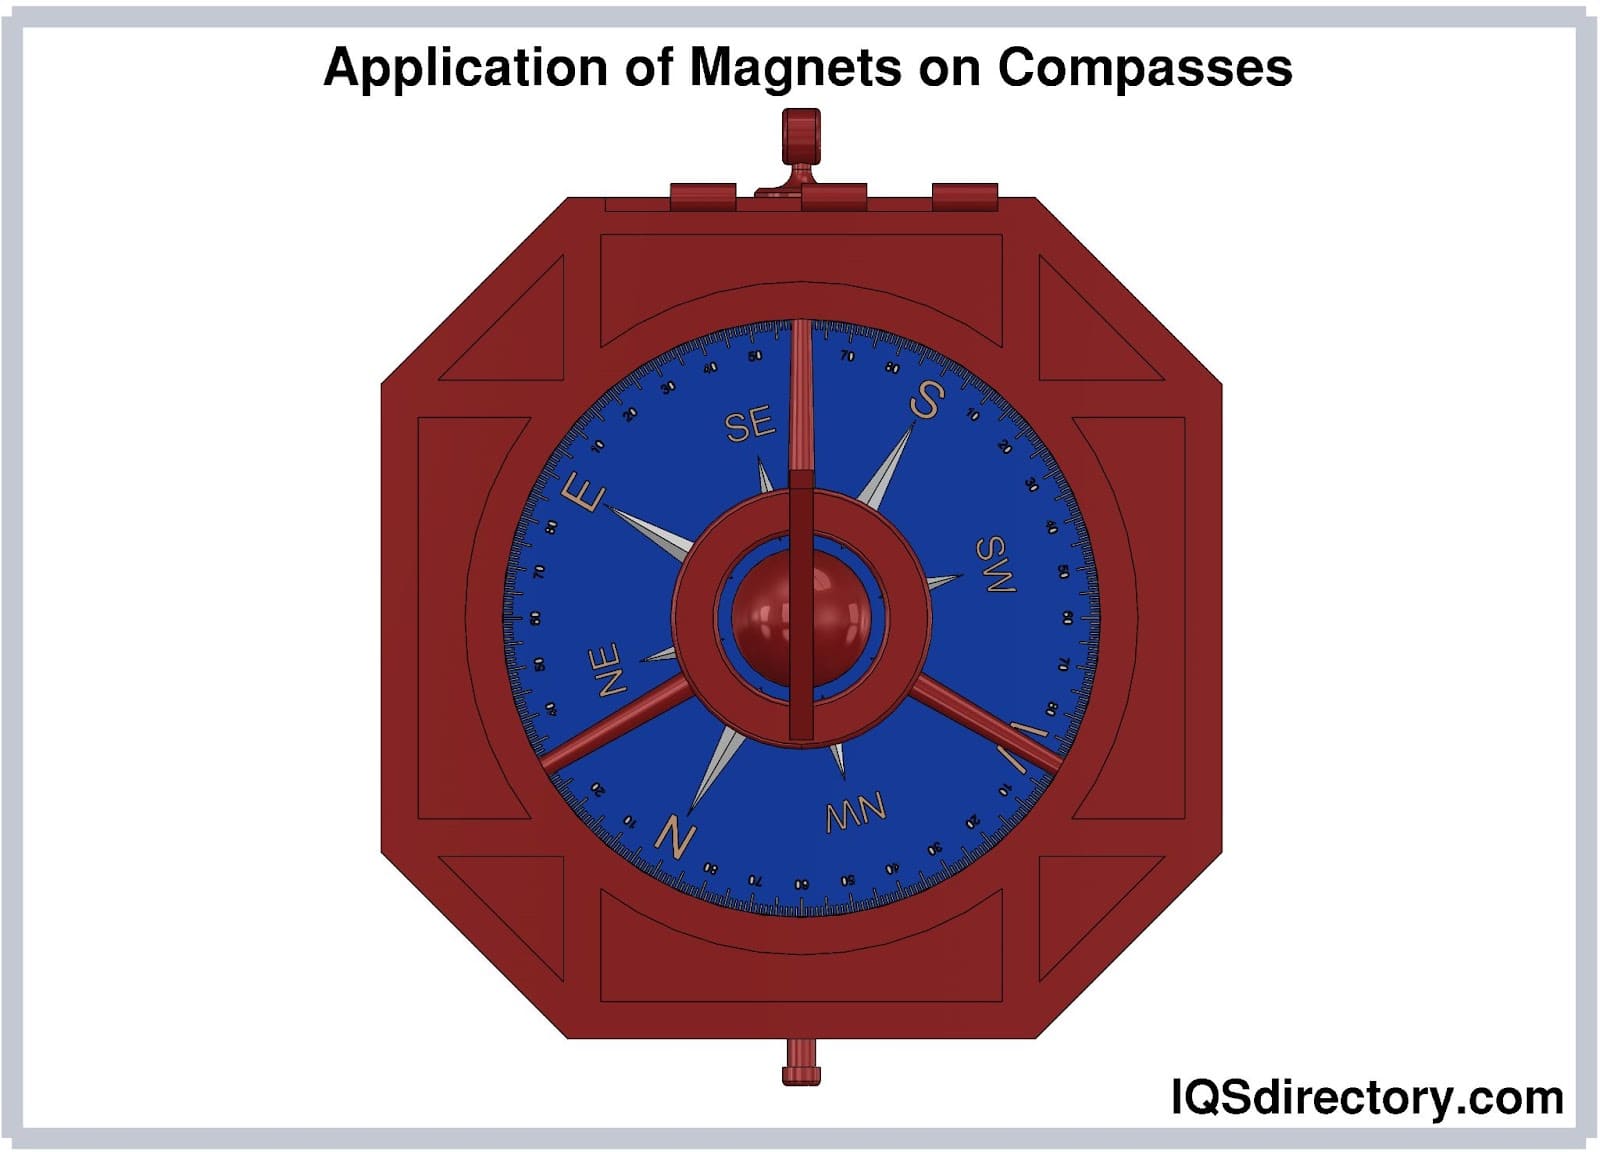 Application of Magnets on Comapsses